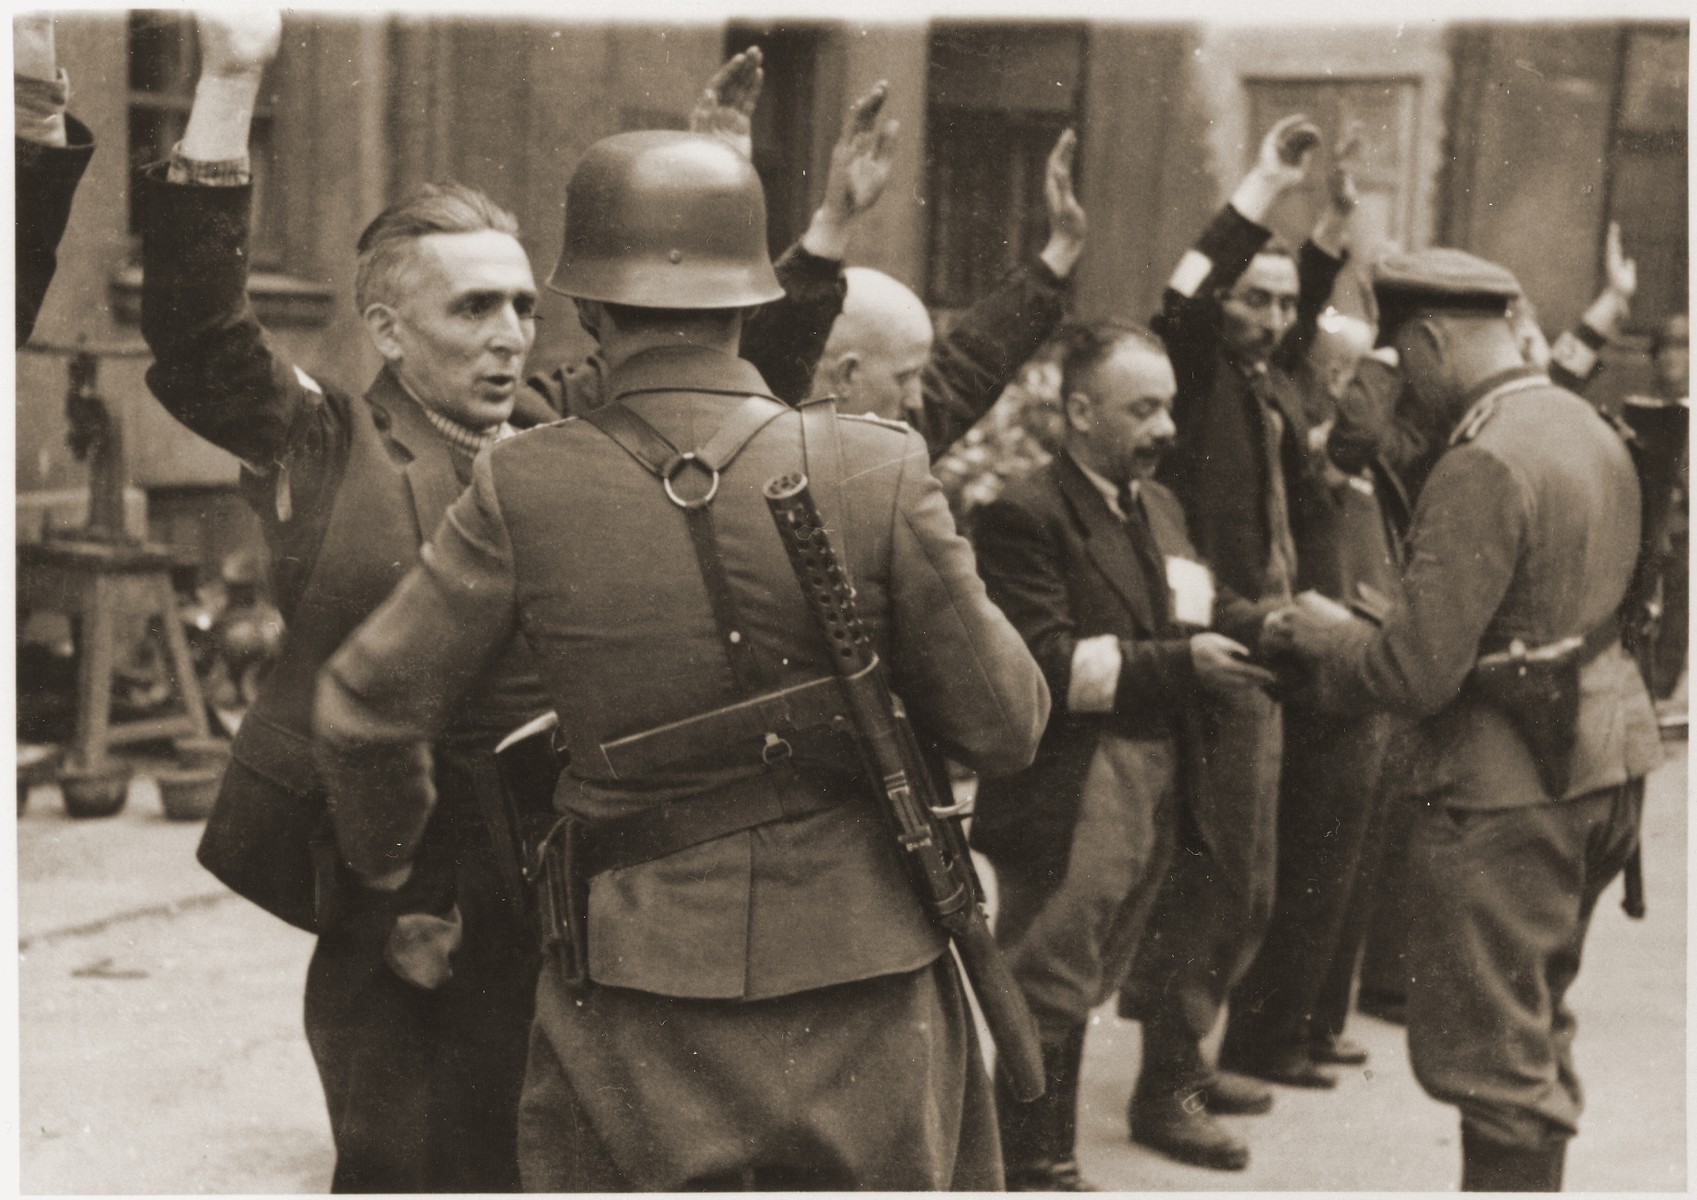 SS troops and officers search the Jewish department heads of the Brauer armaments factory during the suppression of the Warsaw ghetto uprising.  

The original German caption reads: "The Brauer firm."

Original caption from donated photograph reads:  "The following pictures are copies of the book conaning the report of the German commander who was responsible for cleaning out that ghetto in Warsaw, Poland.  This report, in the form of a leather bound book, was presented as evidence by the U.S. prosecution, Maj. Frank Walsh, at the international tribunal trials at Nurnberg, Germany."